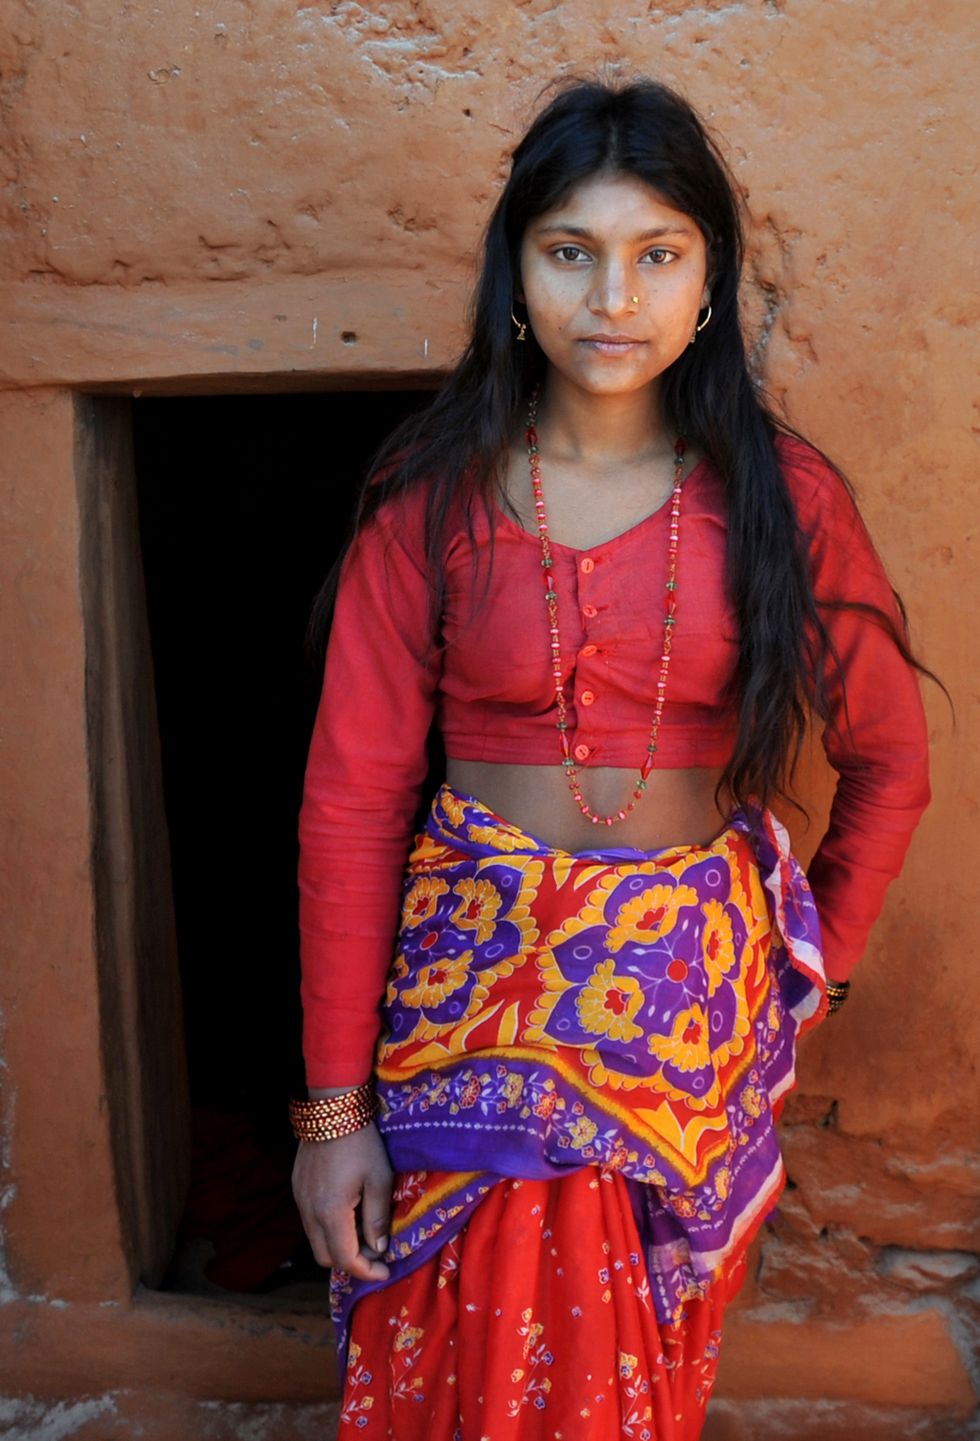 A young Nepalese woman shows her chaupadi house